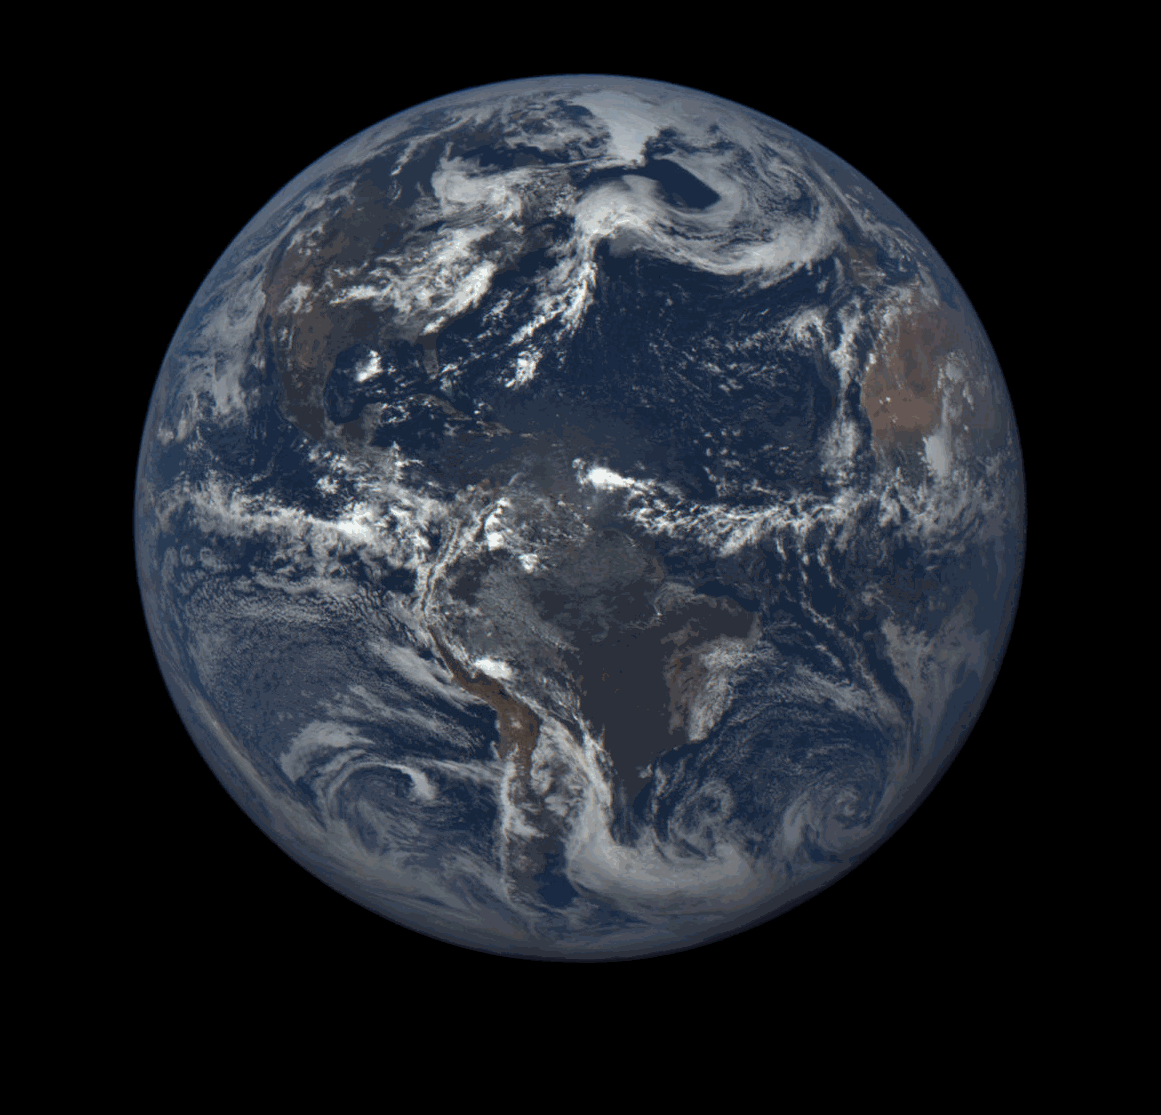 A day in the life of Earth, as seen from a million miles away through the lens of NASA’s Earth Polychromatic Imaging Camera, affixed to NOAA’s Deep Space Climate Observatory. Credit: NASA.